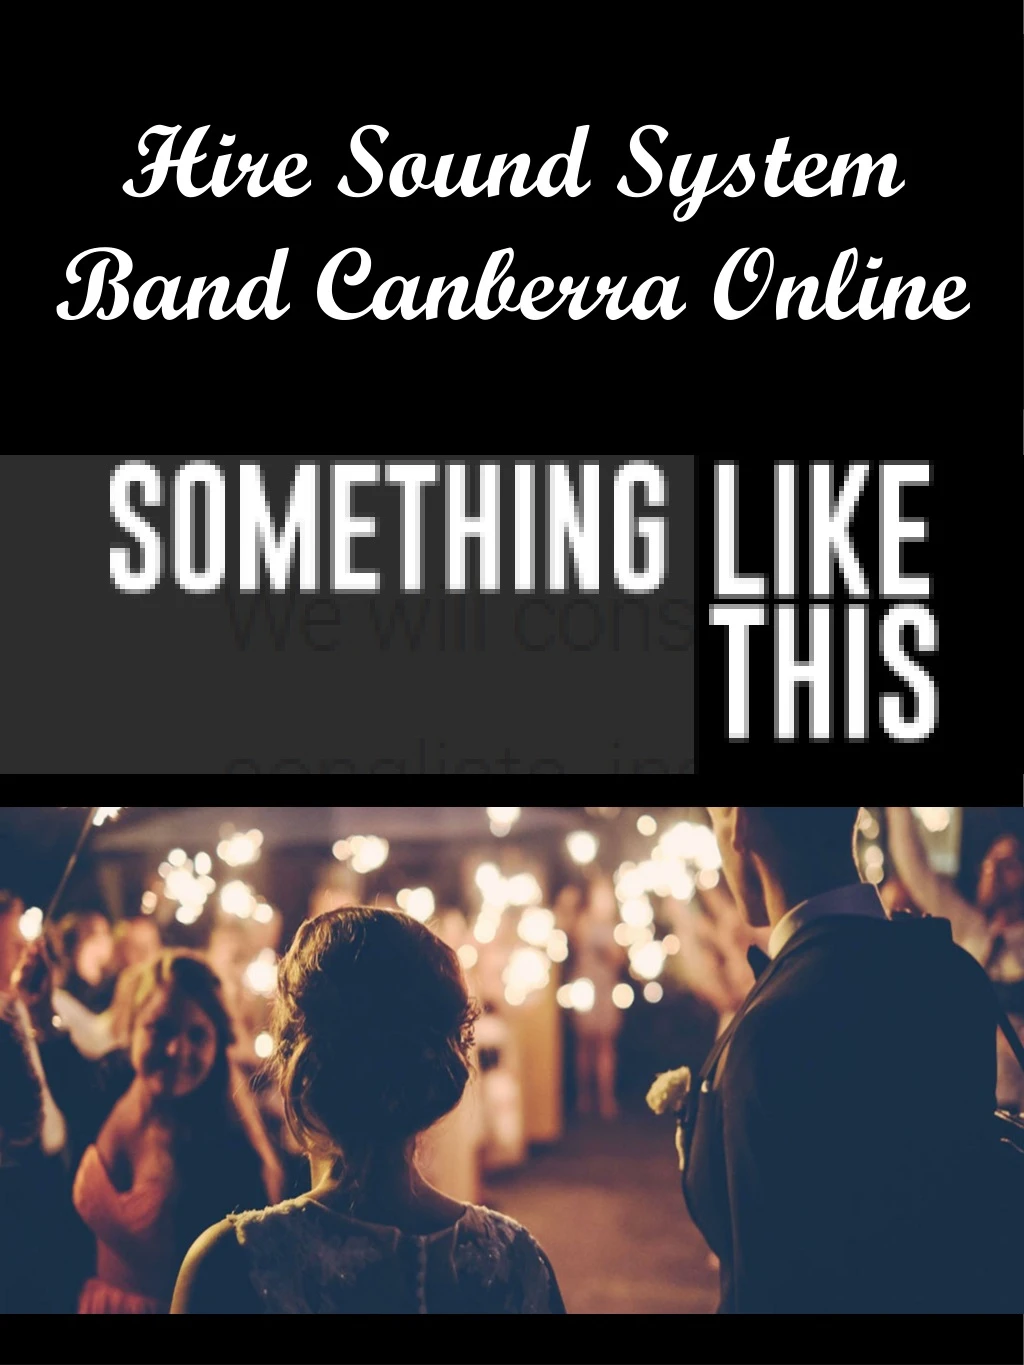 hire sound system band canberra online